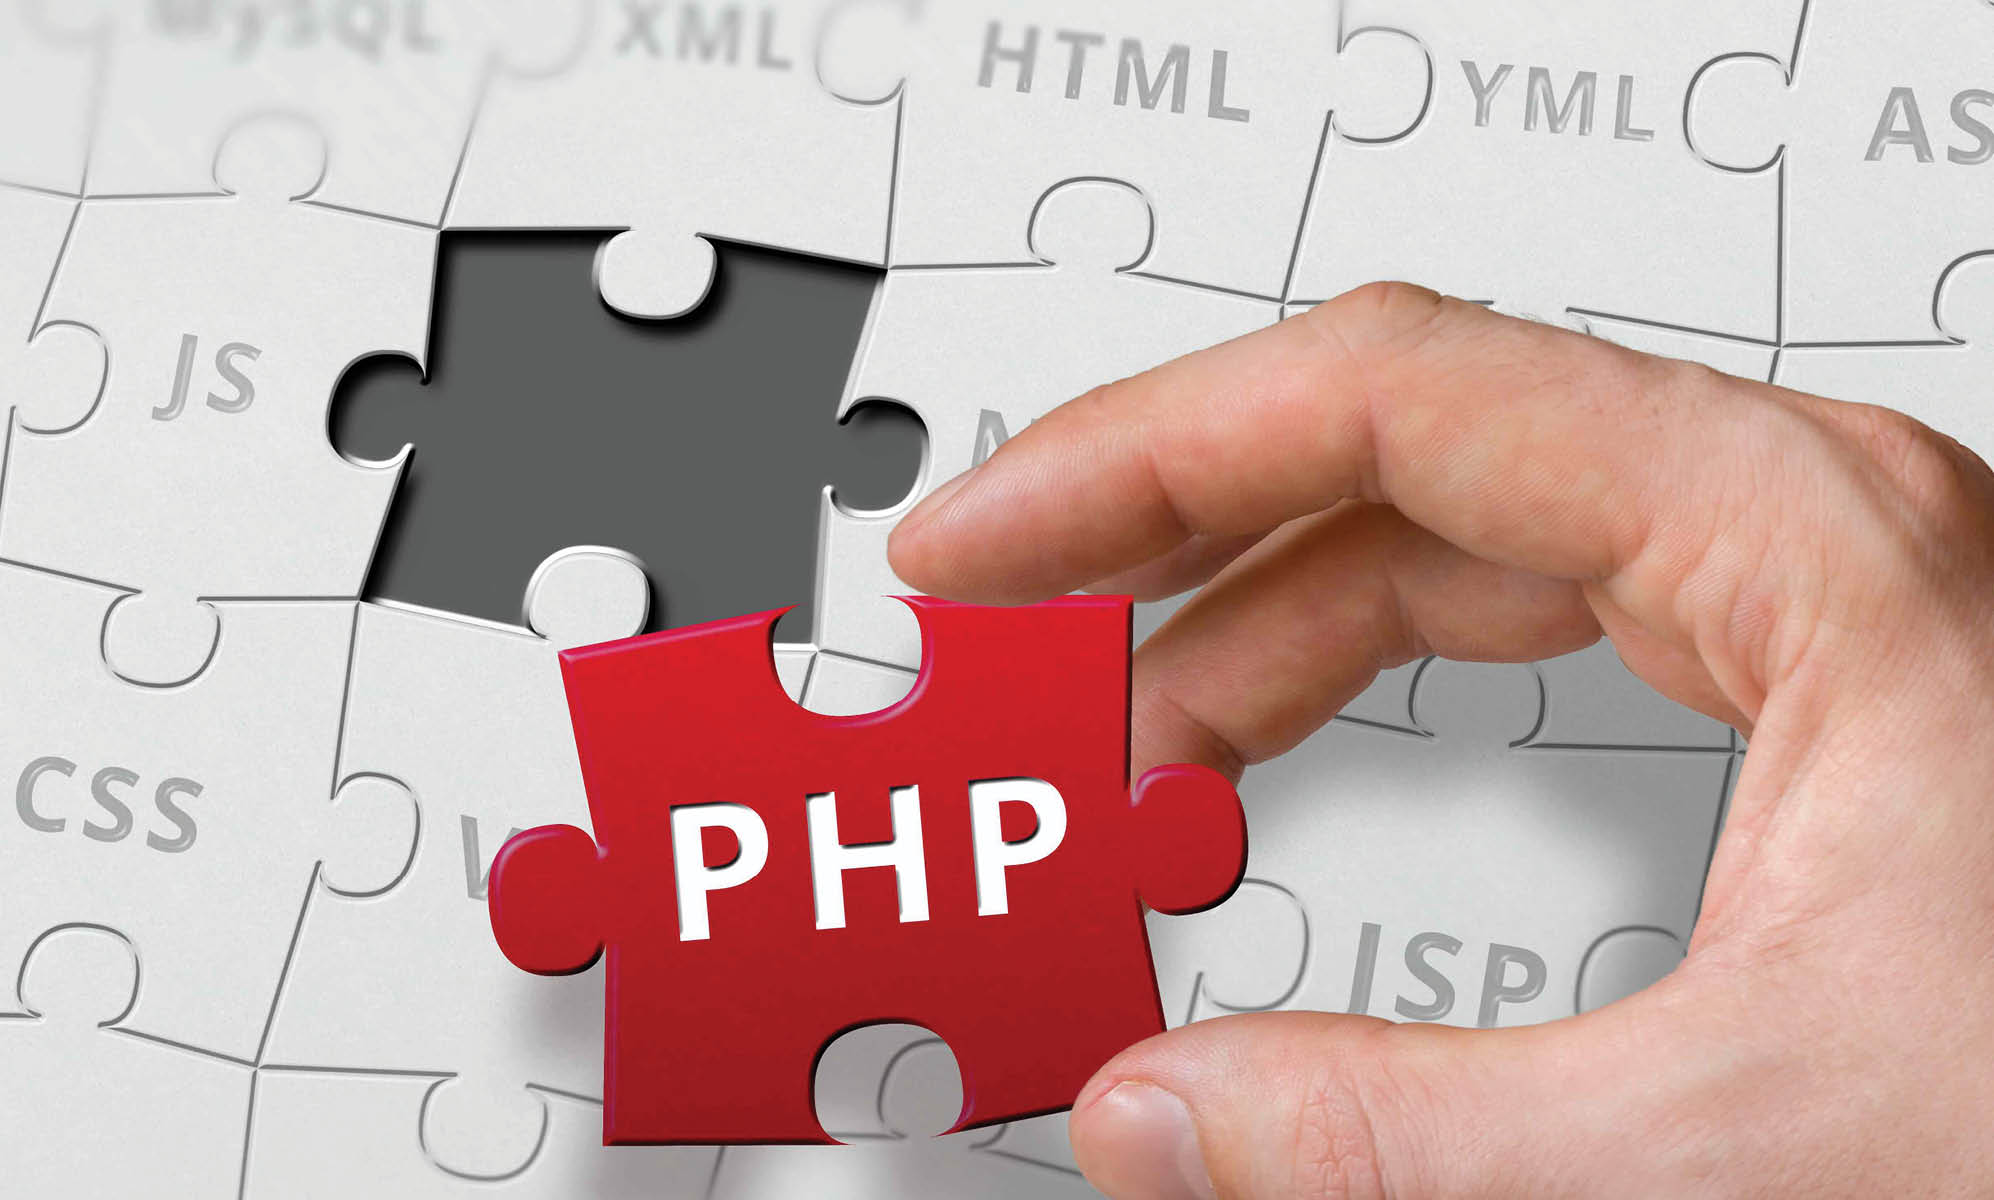 Improving PHP Performance for Web Applications